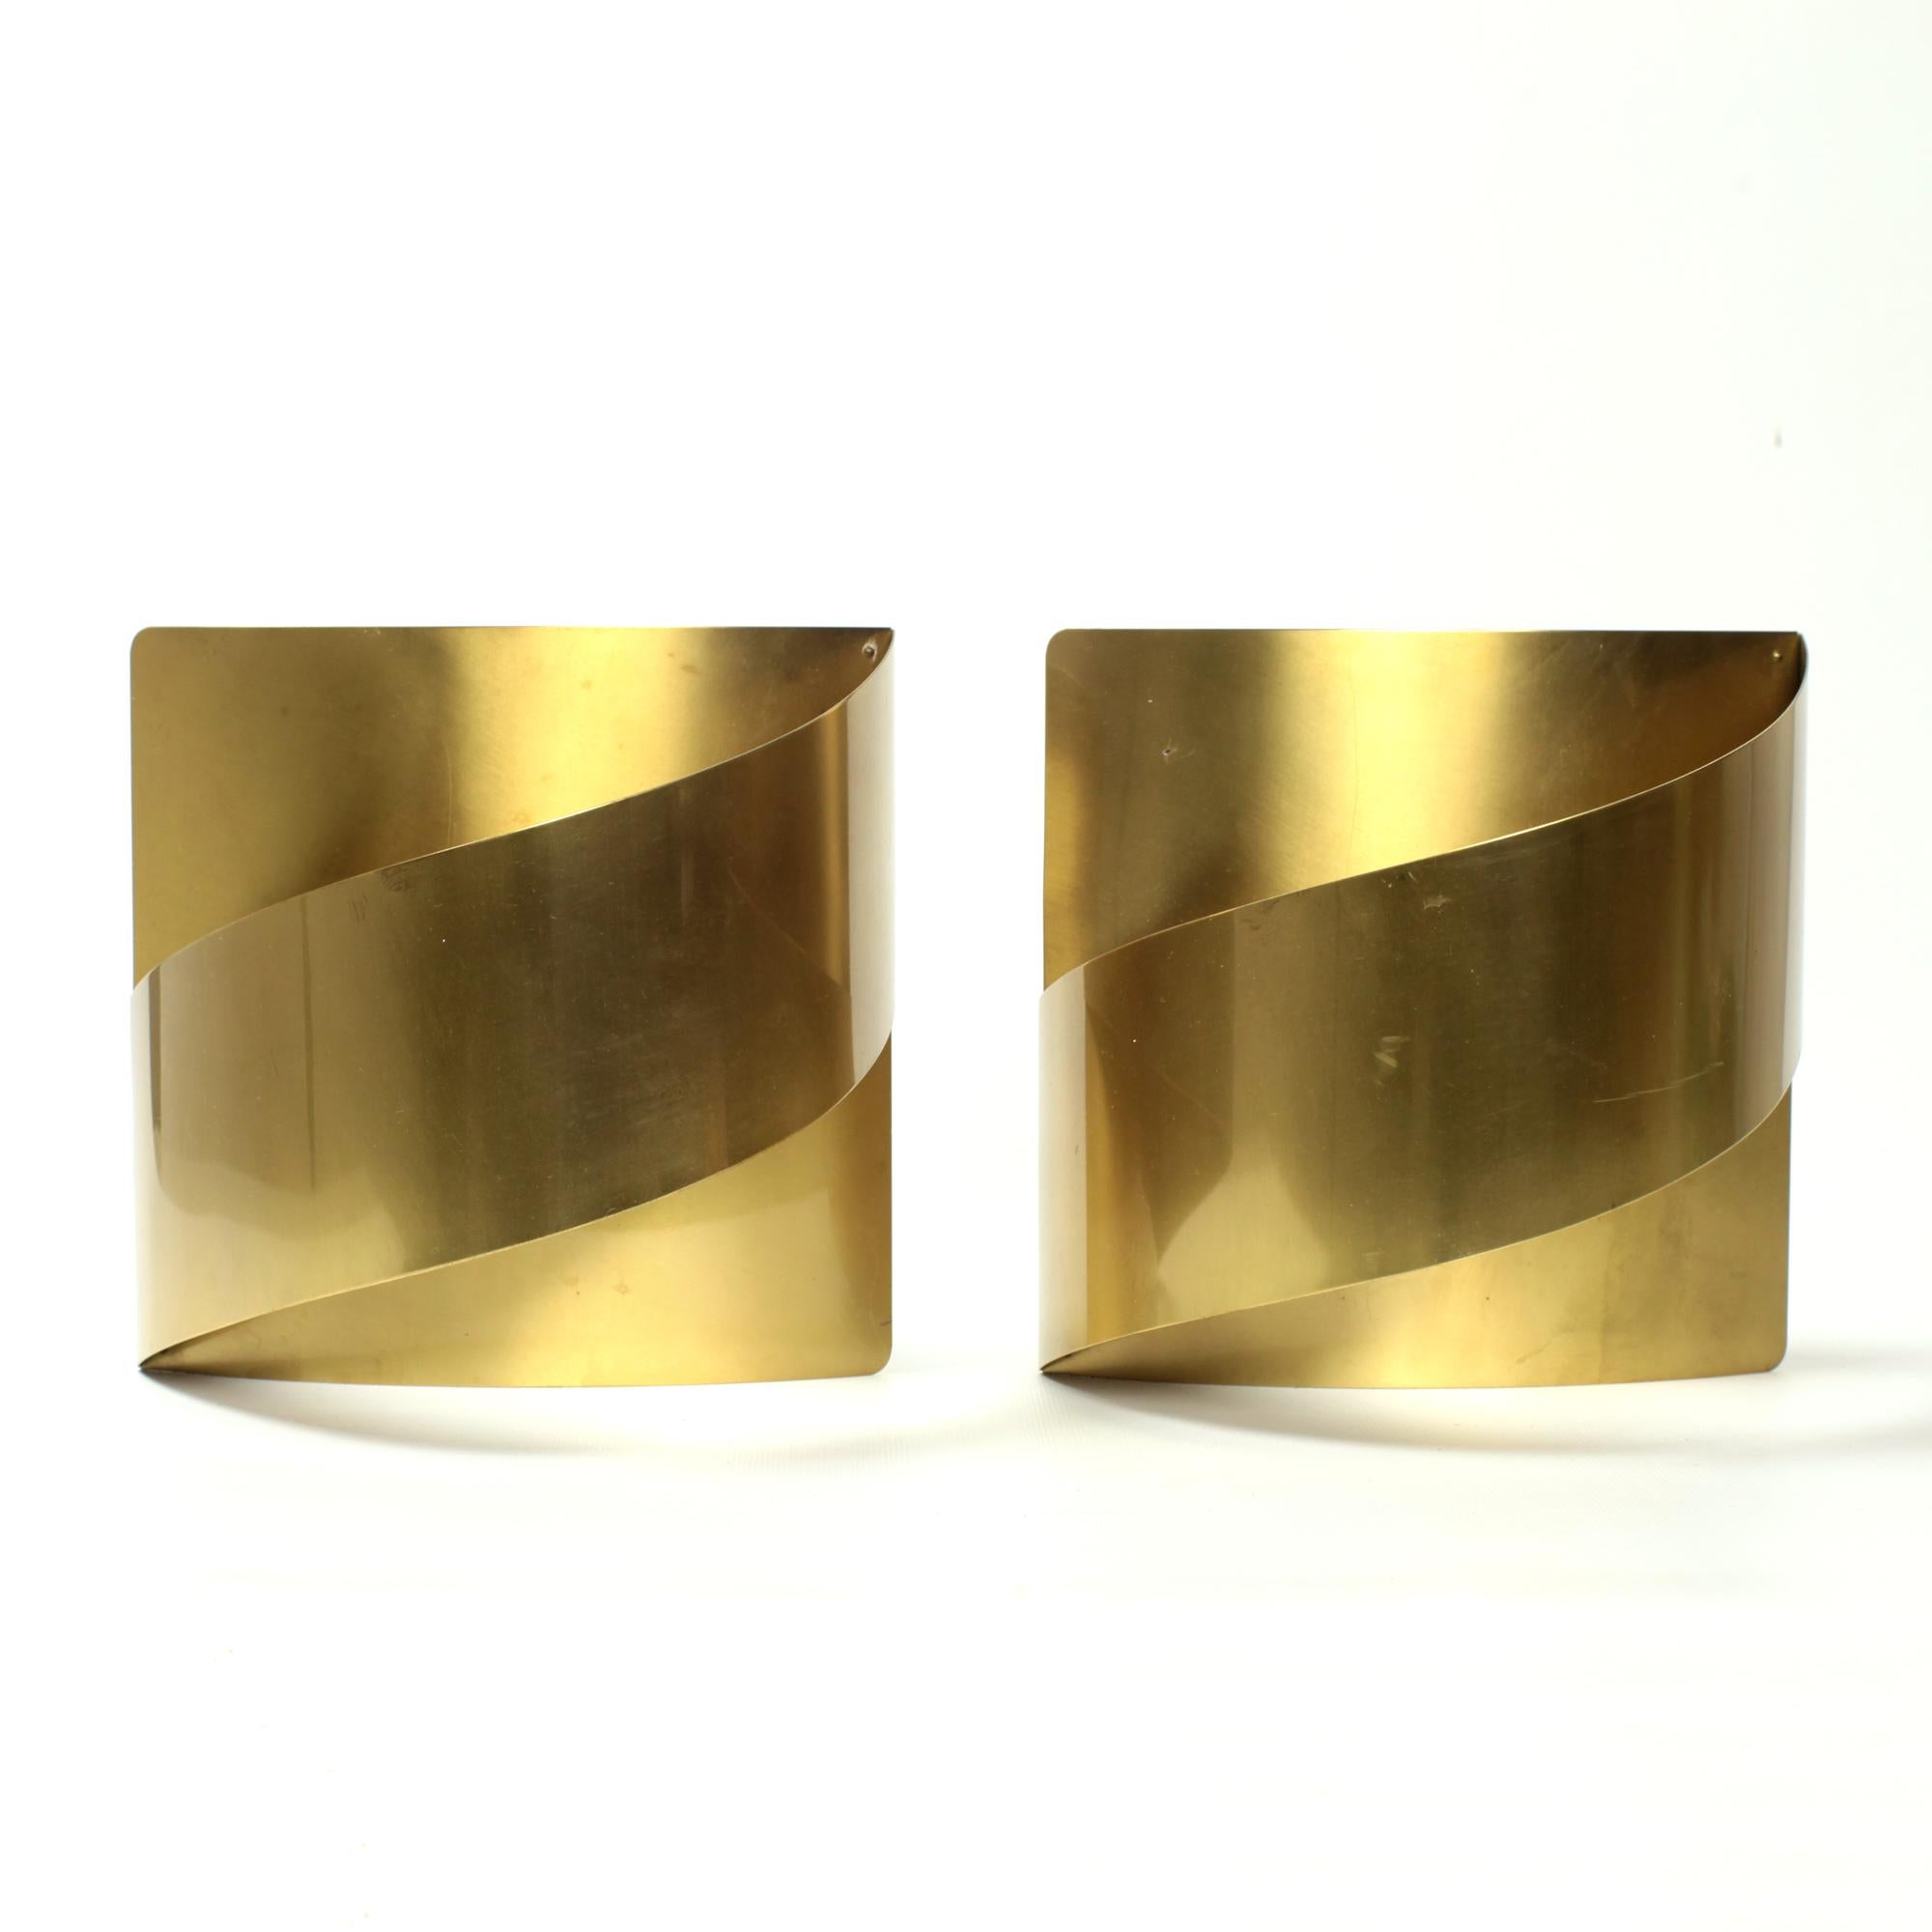 1960s Pair of Brass Wall-Mounted Lamps by Peter Celsing For Sale 2